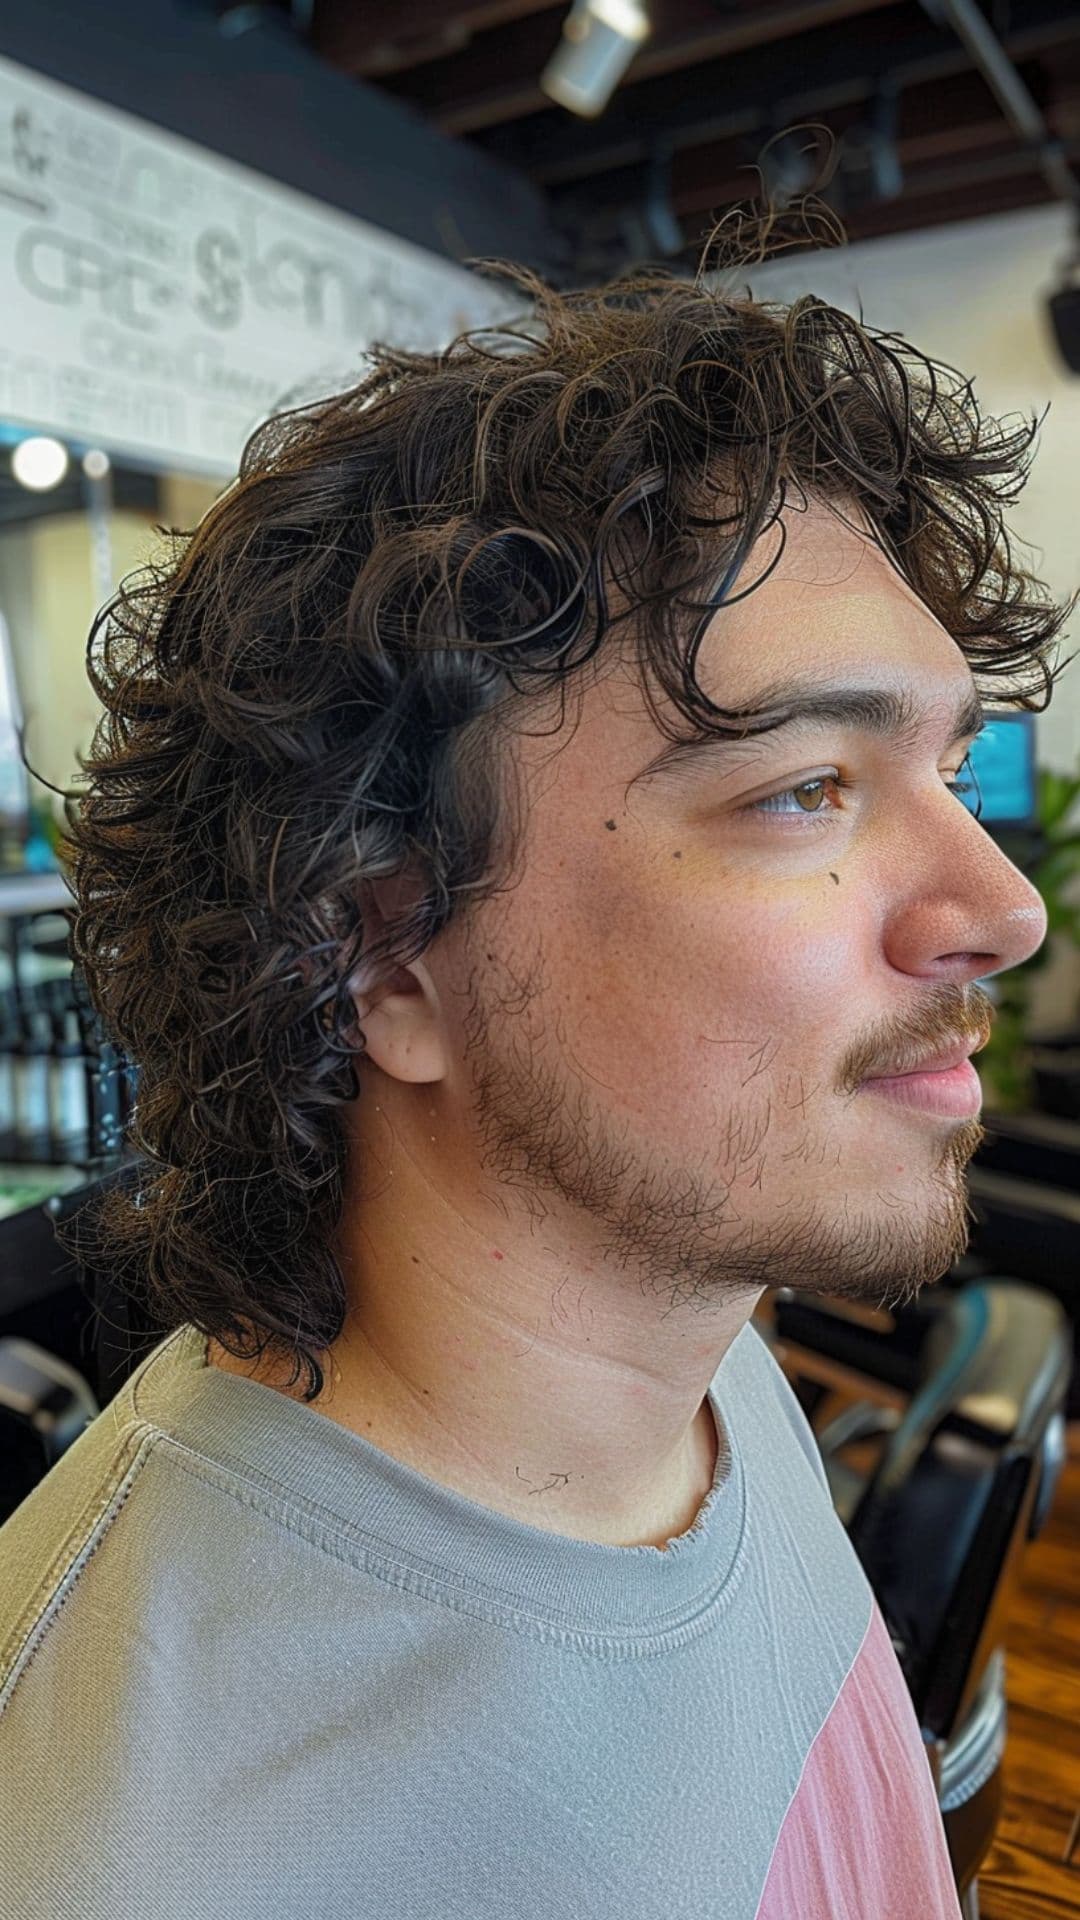 A man modelling a curly shag hairstyle.